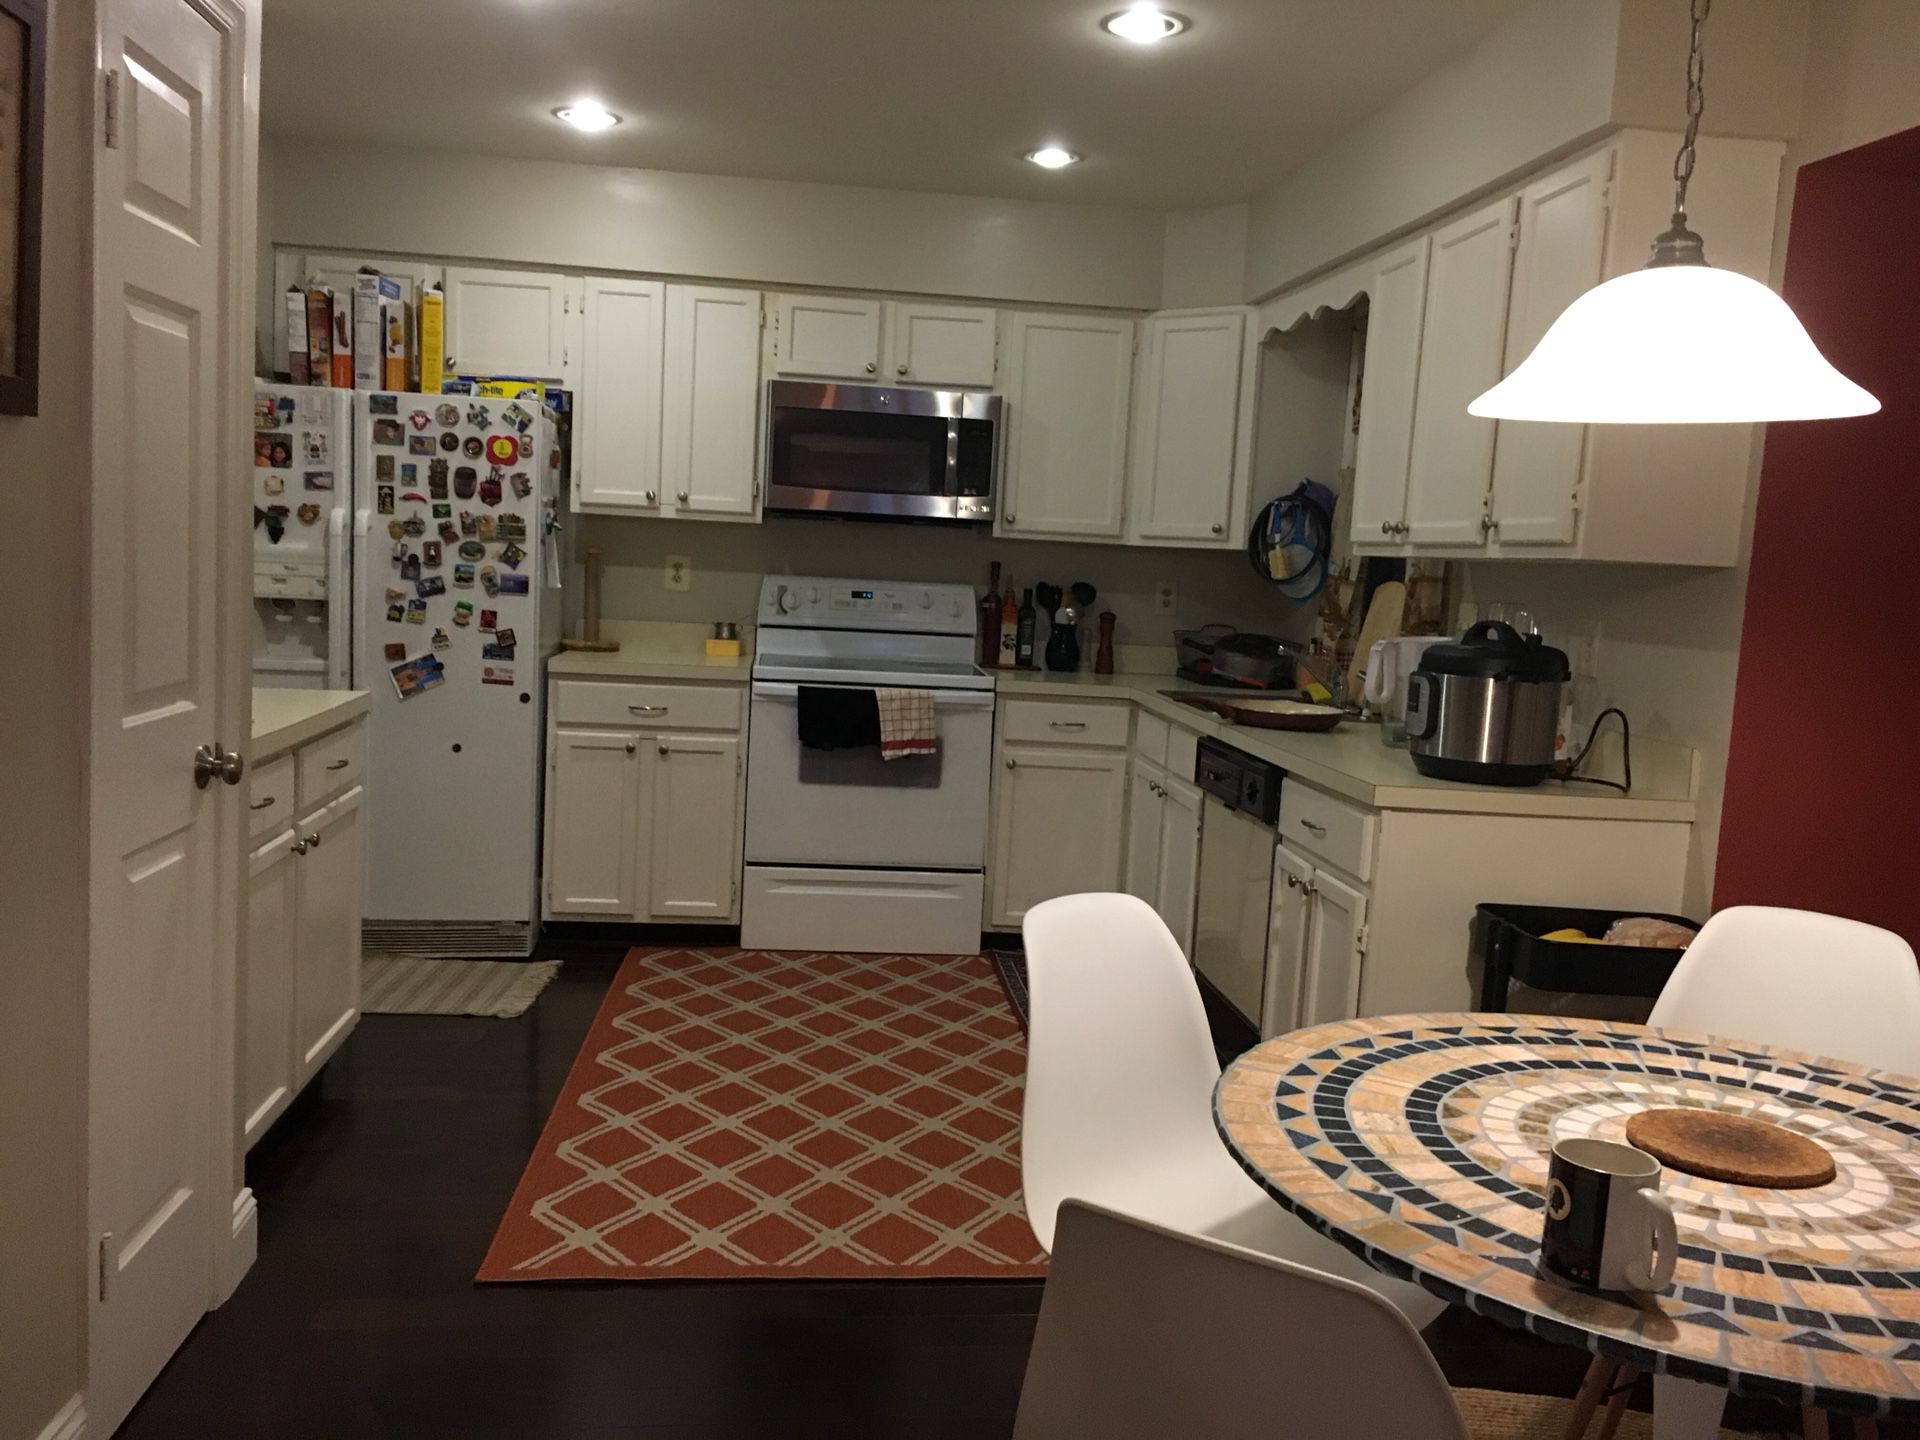 All cabinets and appliances in this kitchen